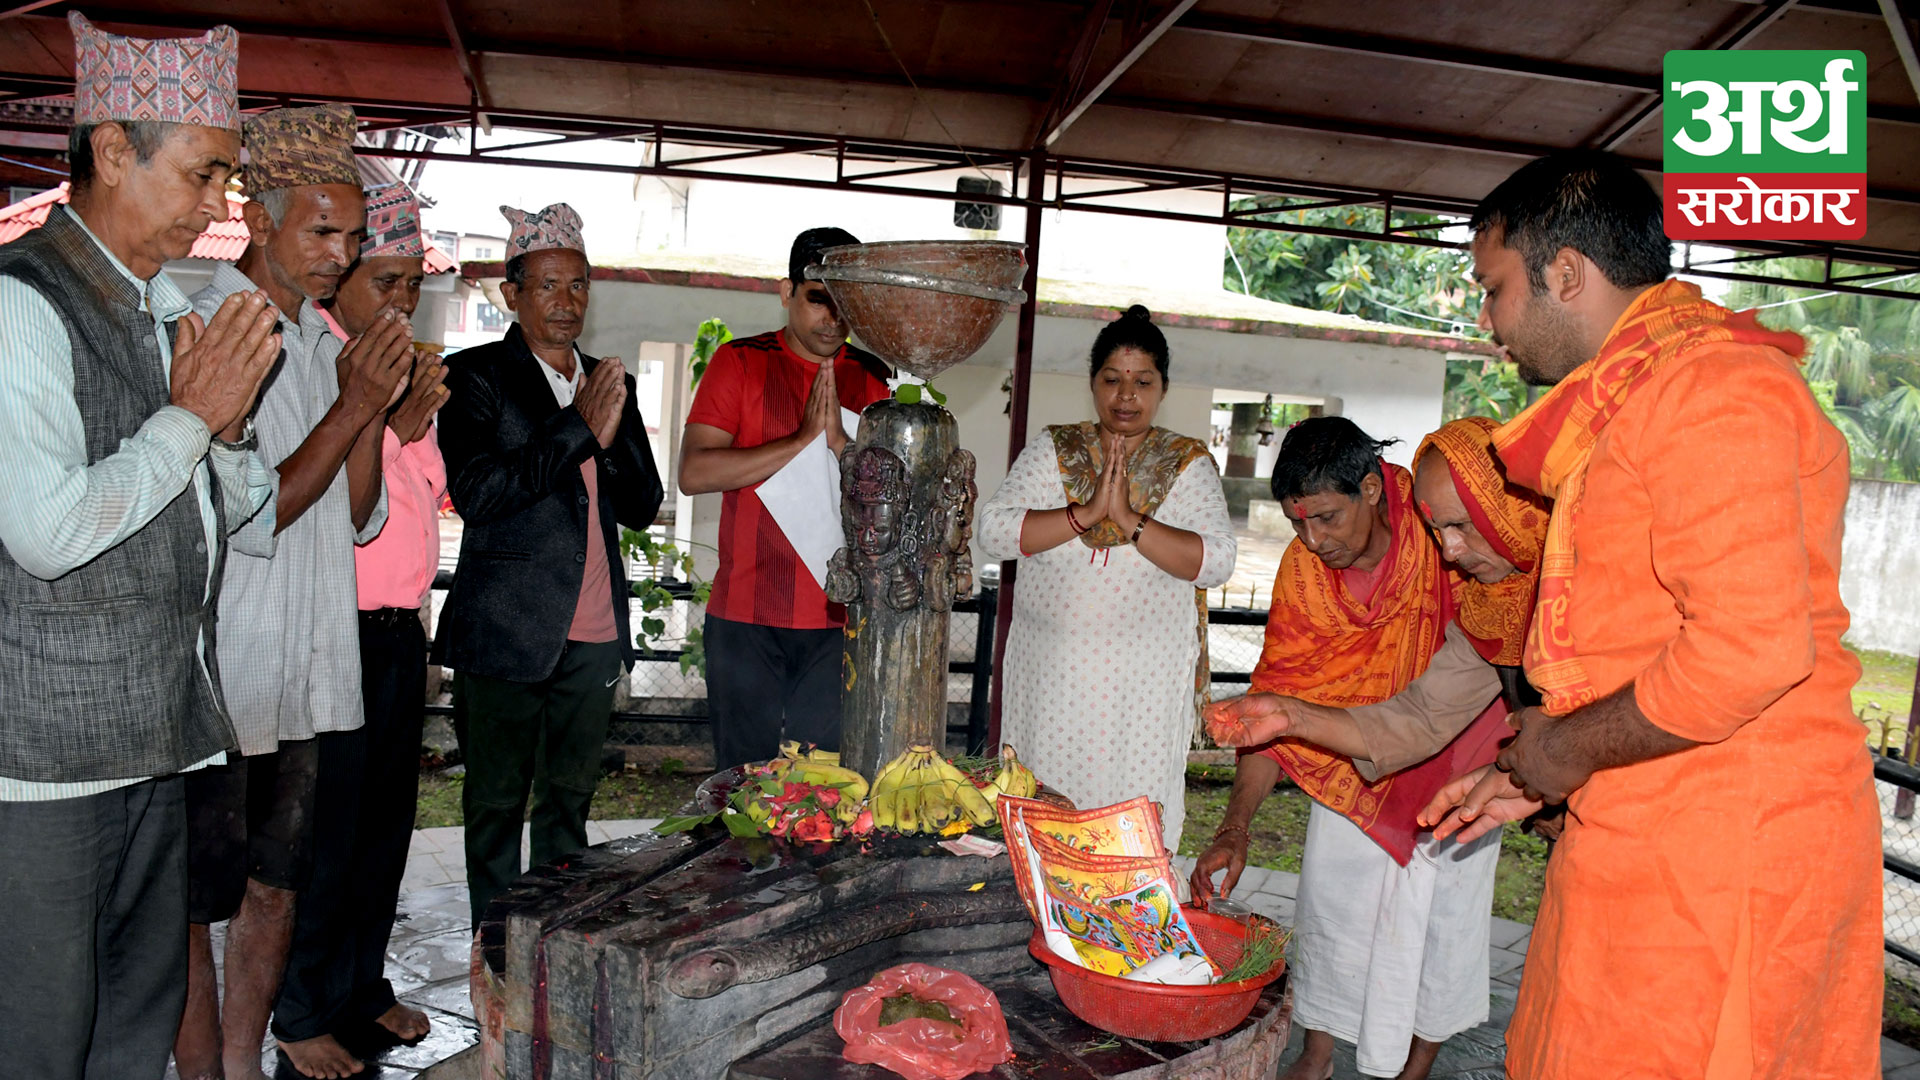 Nagpanchami festival being celebrated today